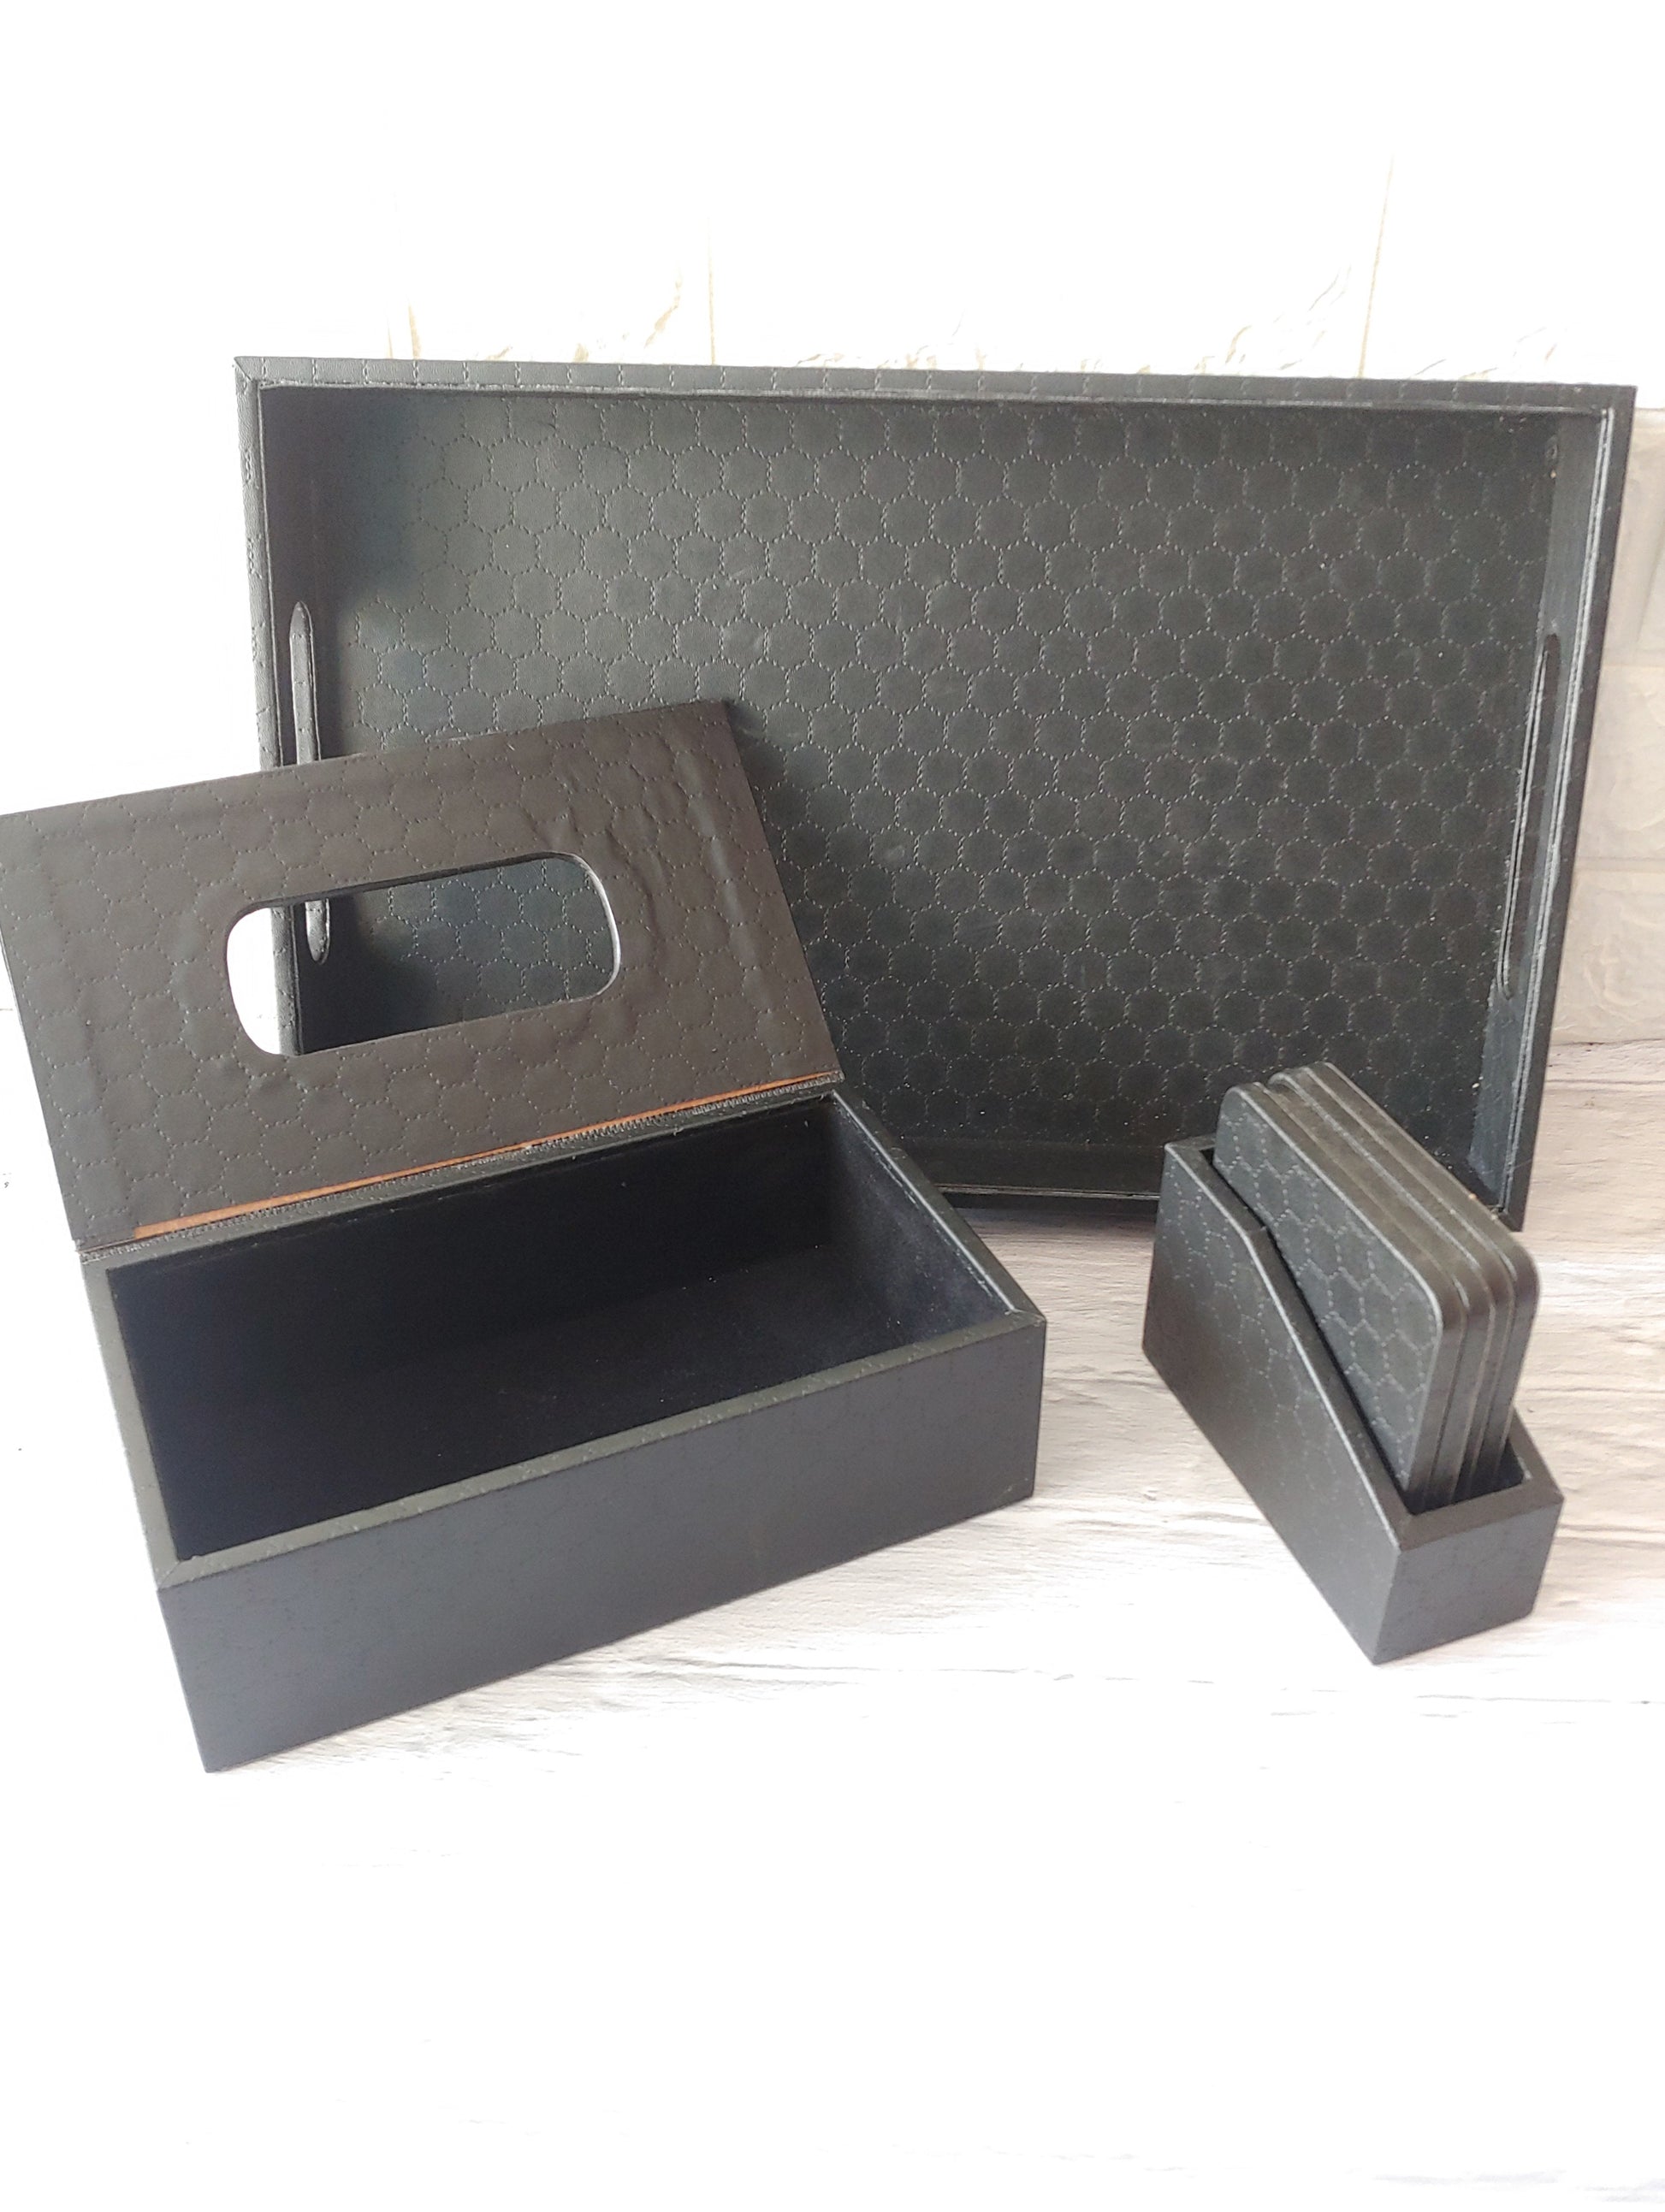 Black Stitched Premium Leather Serving Tray along with tissue holder and coasters